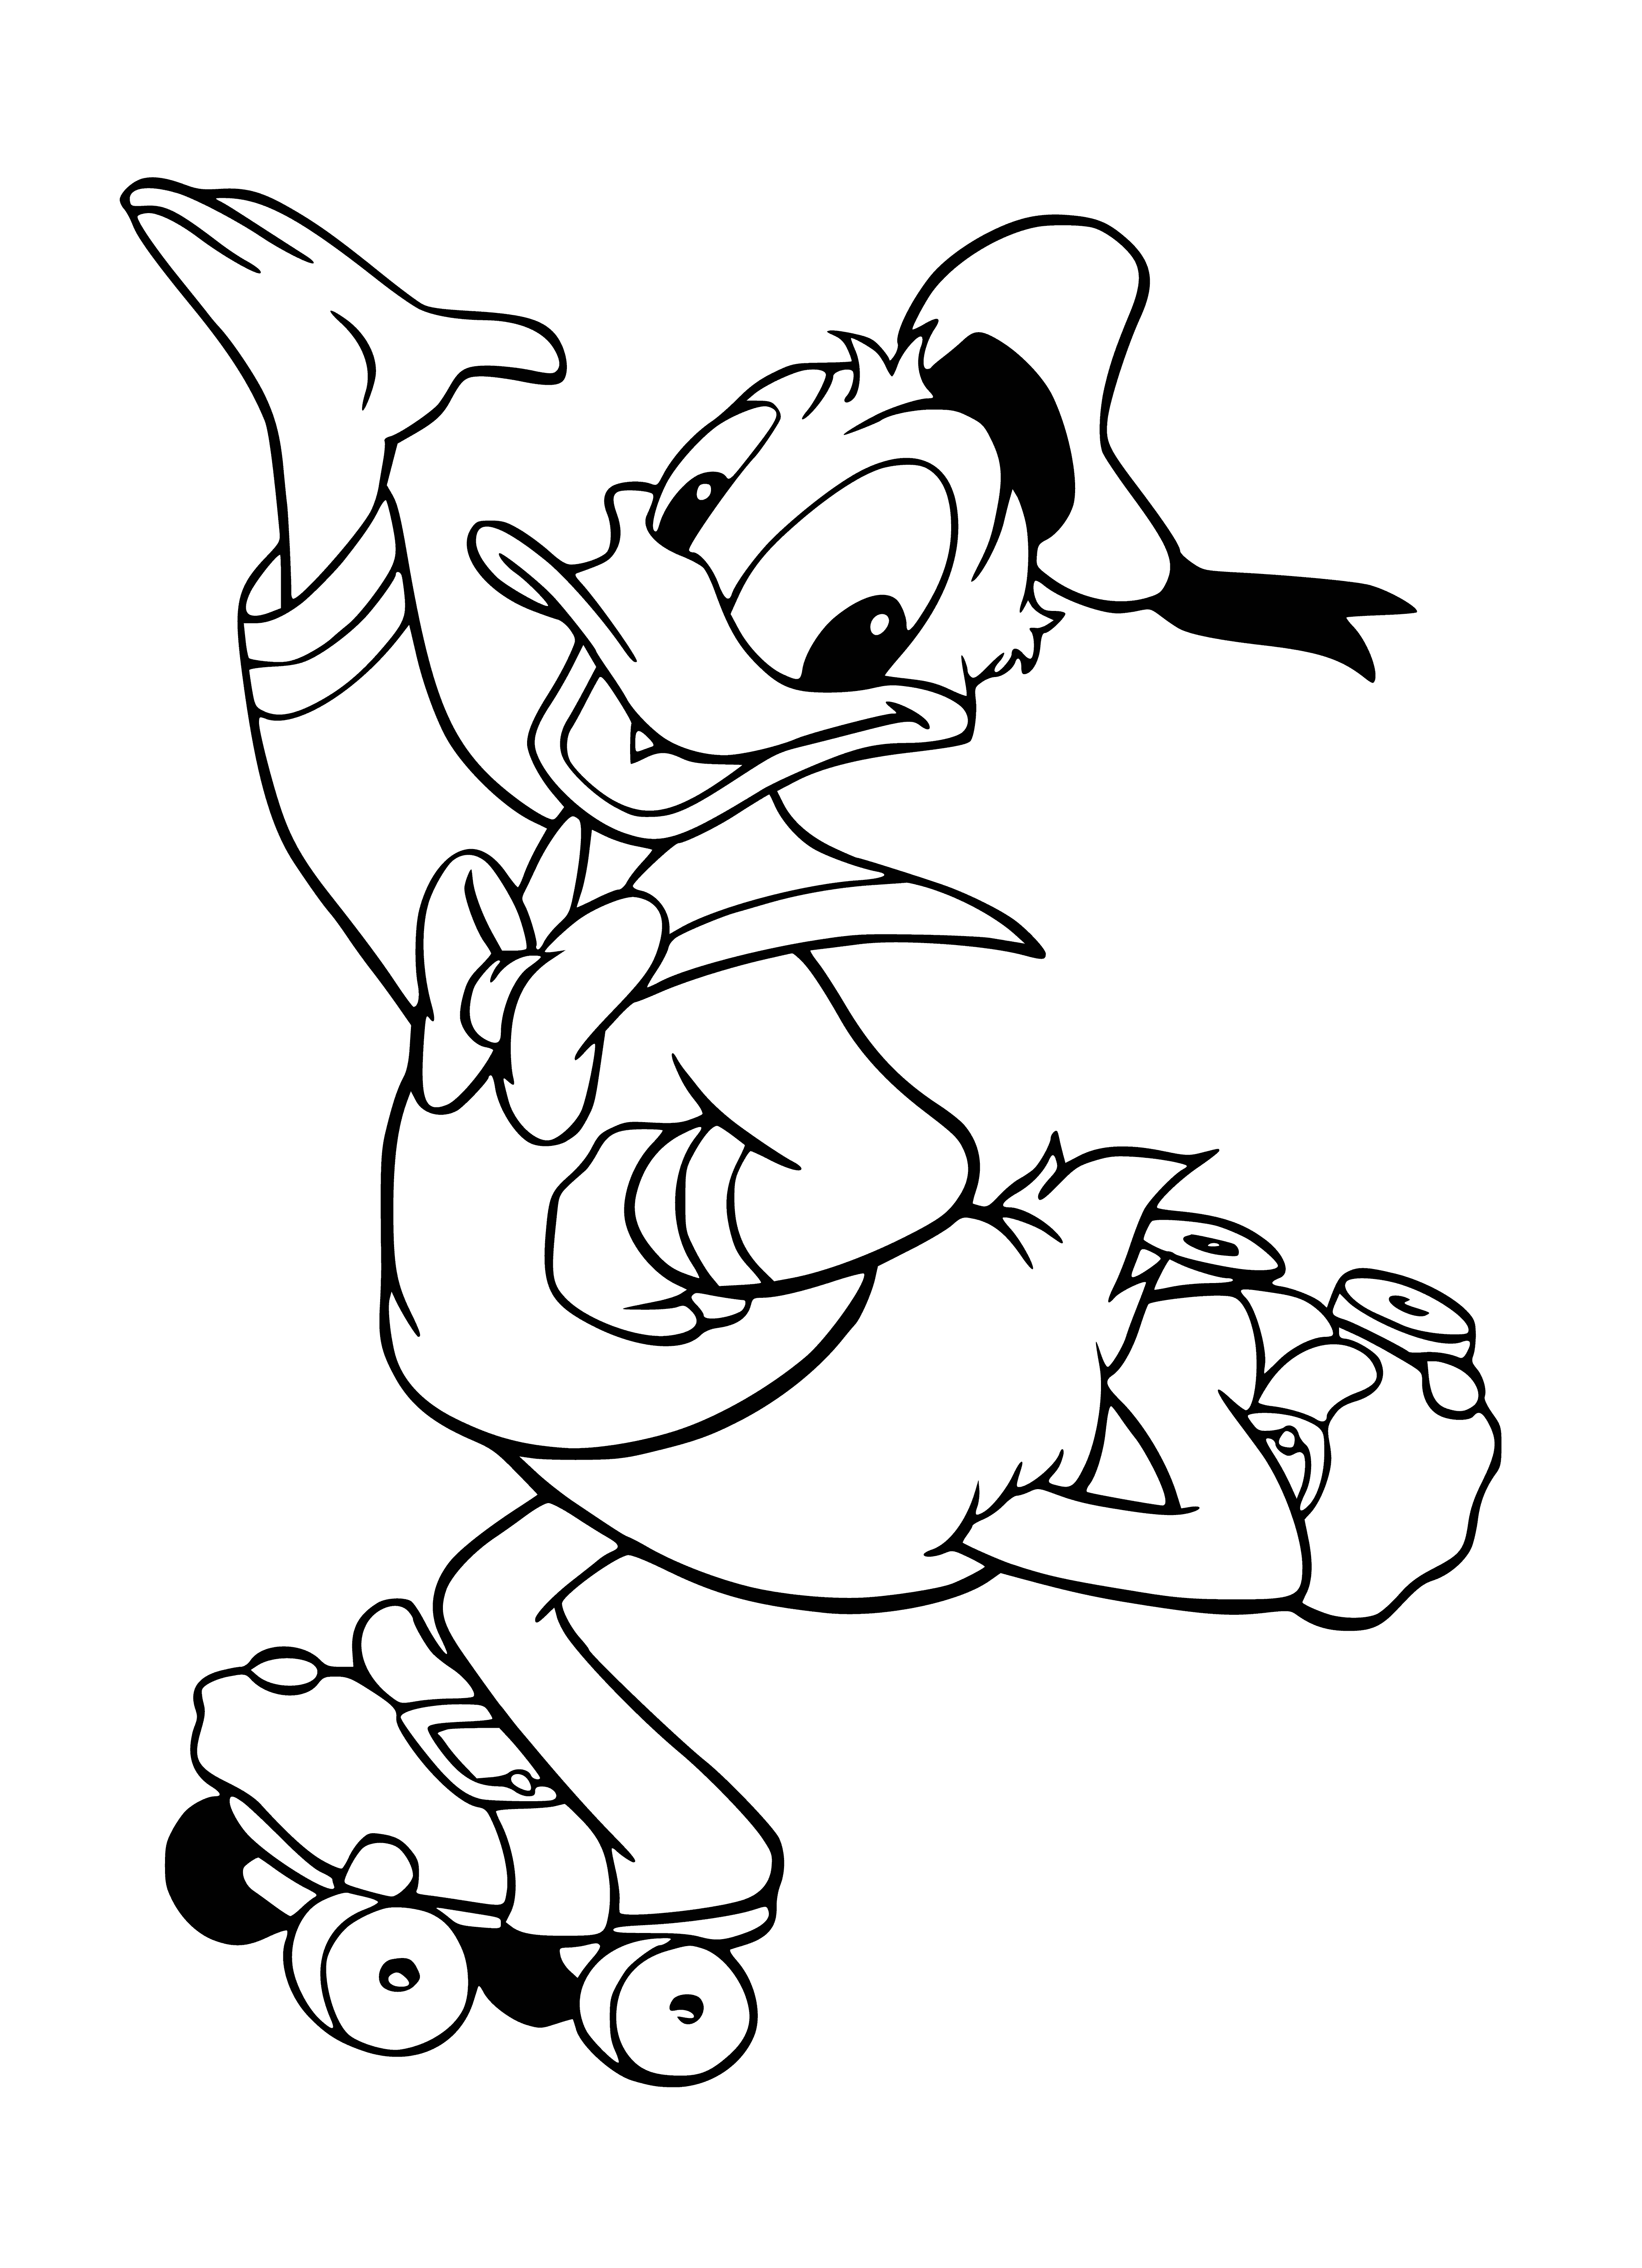 coloring page: Five Mickey Mouse-like characters on roller skates hold hands, skating around in a circle with outstretched arms. #wheelday